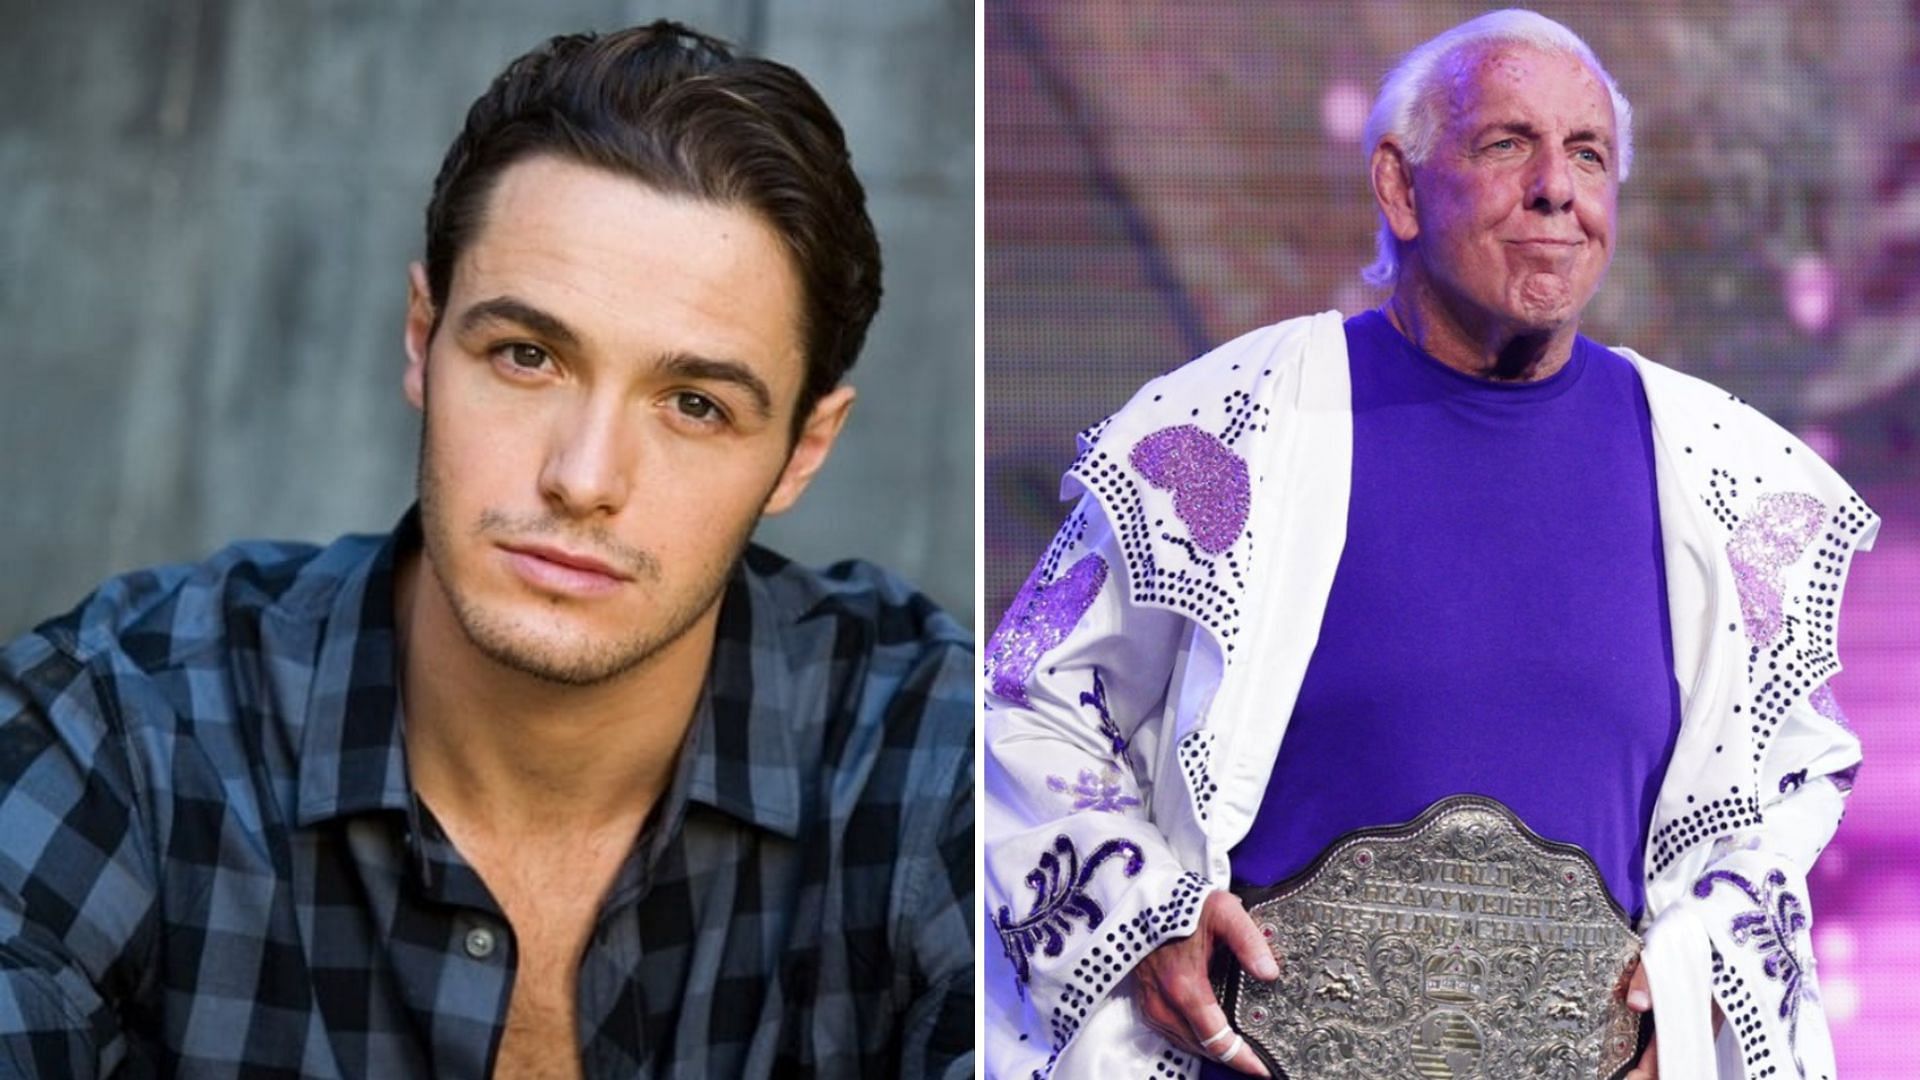 An actor has been cast as Ric Flair in the upcoming Iron Claw film